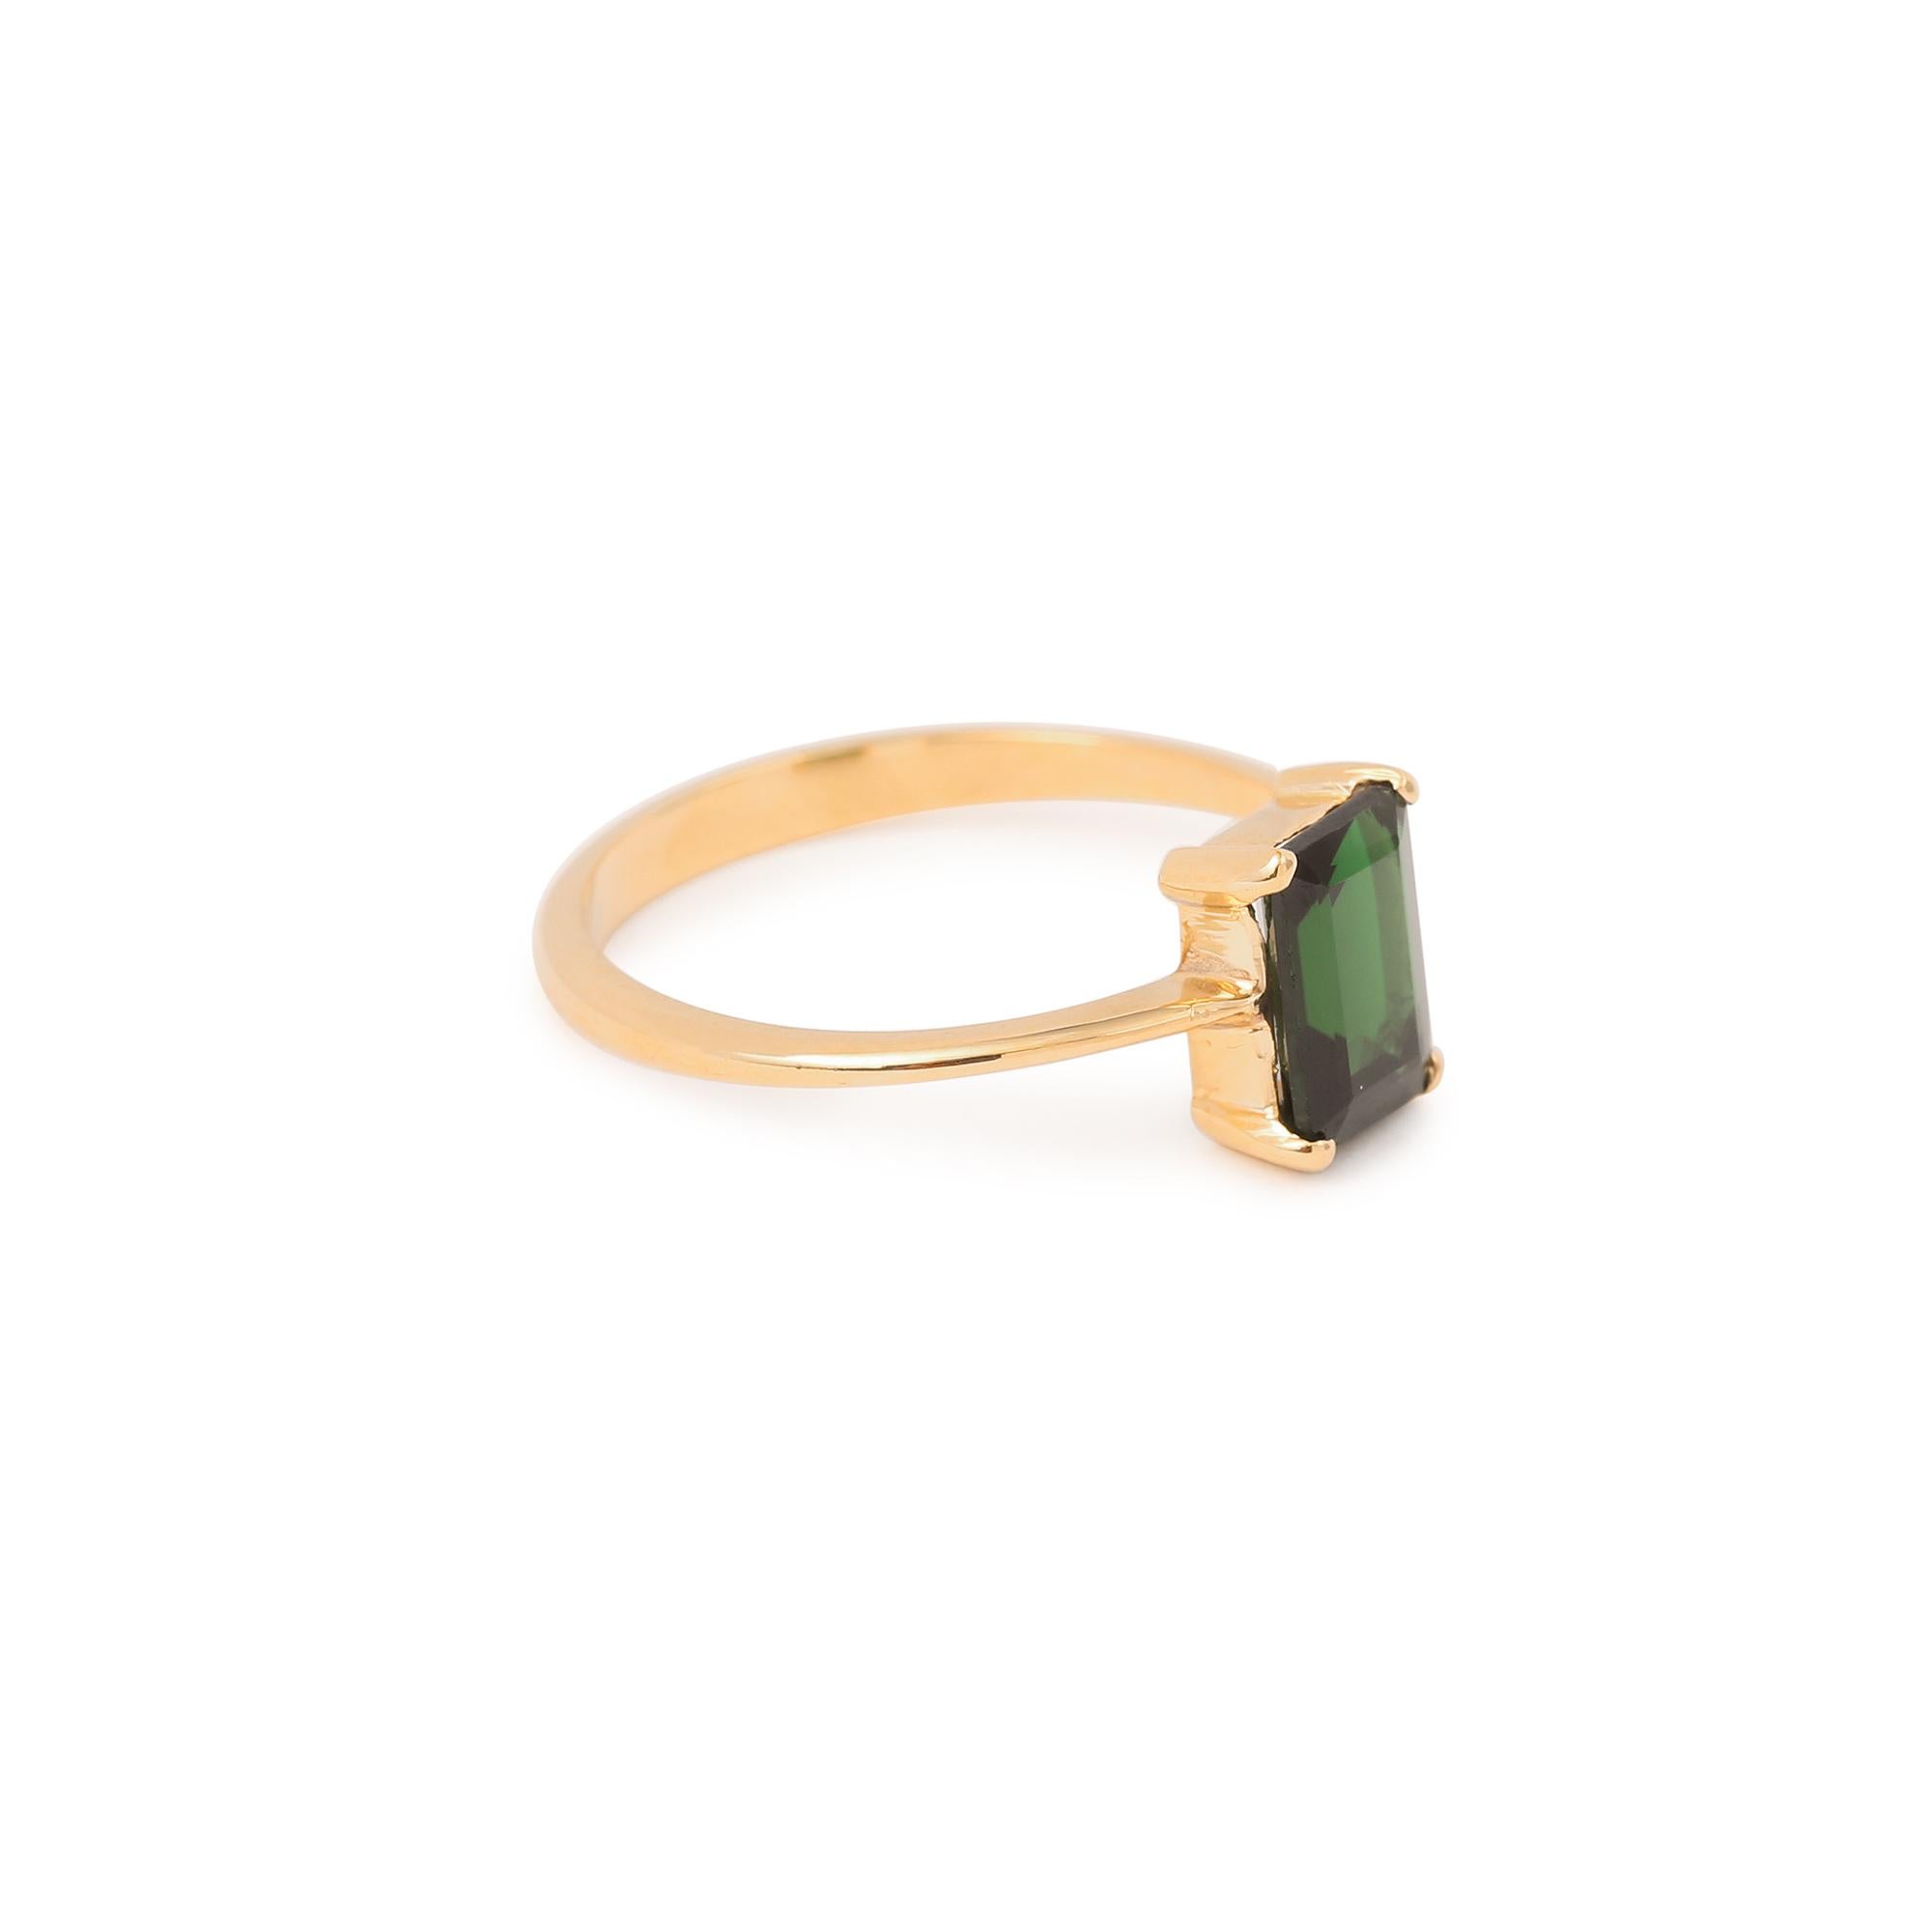 Delicate yellow gold ring set with a rectangular green tourmaline.

Estimated weight of the tourmaline: 0.86 carats

Ring size: 6.44 x 8.32 x 3.75 mm (0.254 x 0.328 x 0.148 inch)

Finger size: 54 (US size: 6.75)

18K yellow gold, 750/1000th

France,